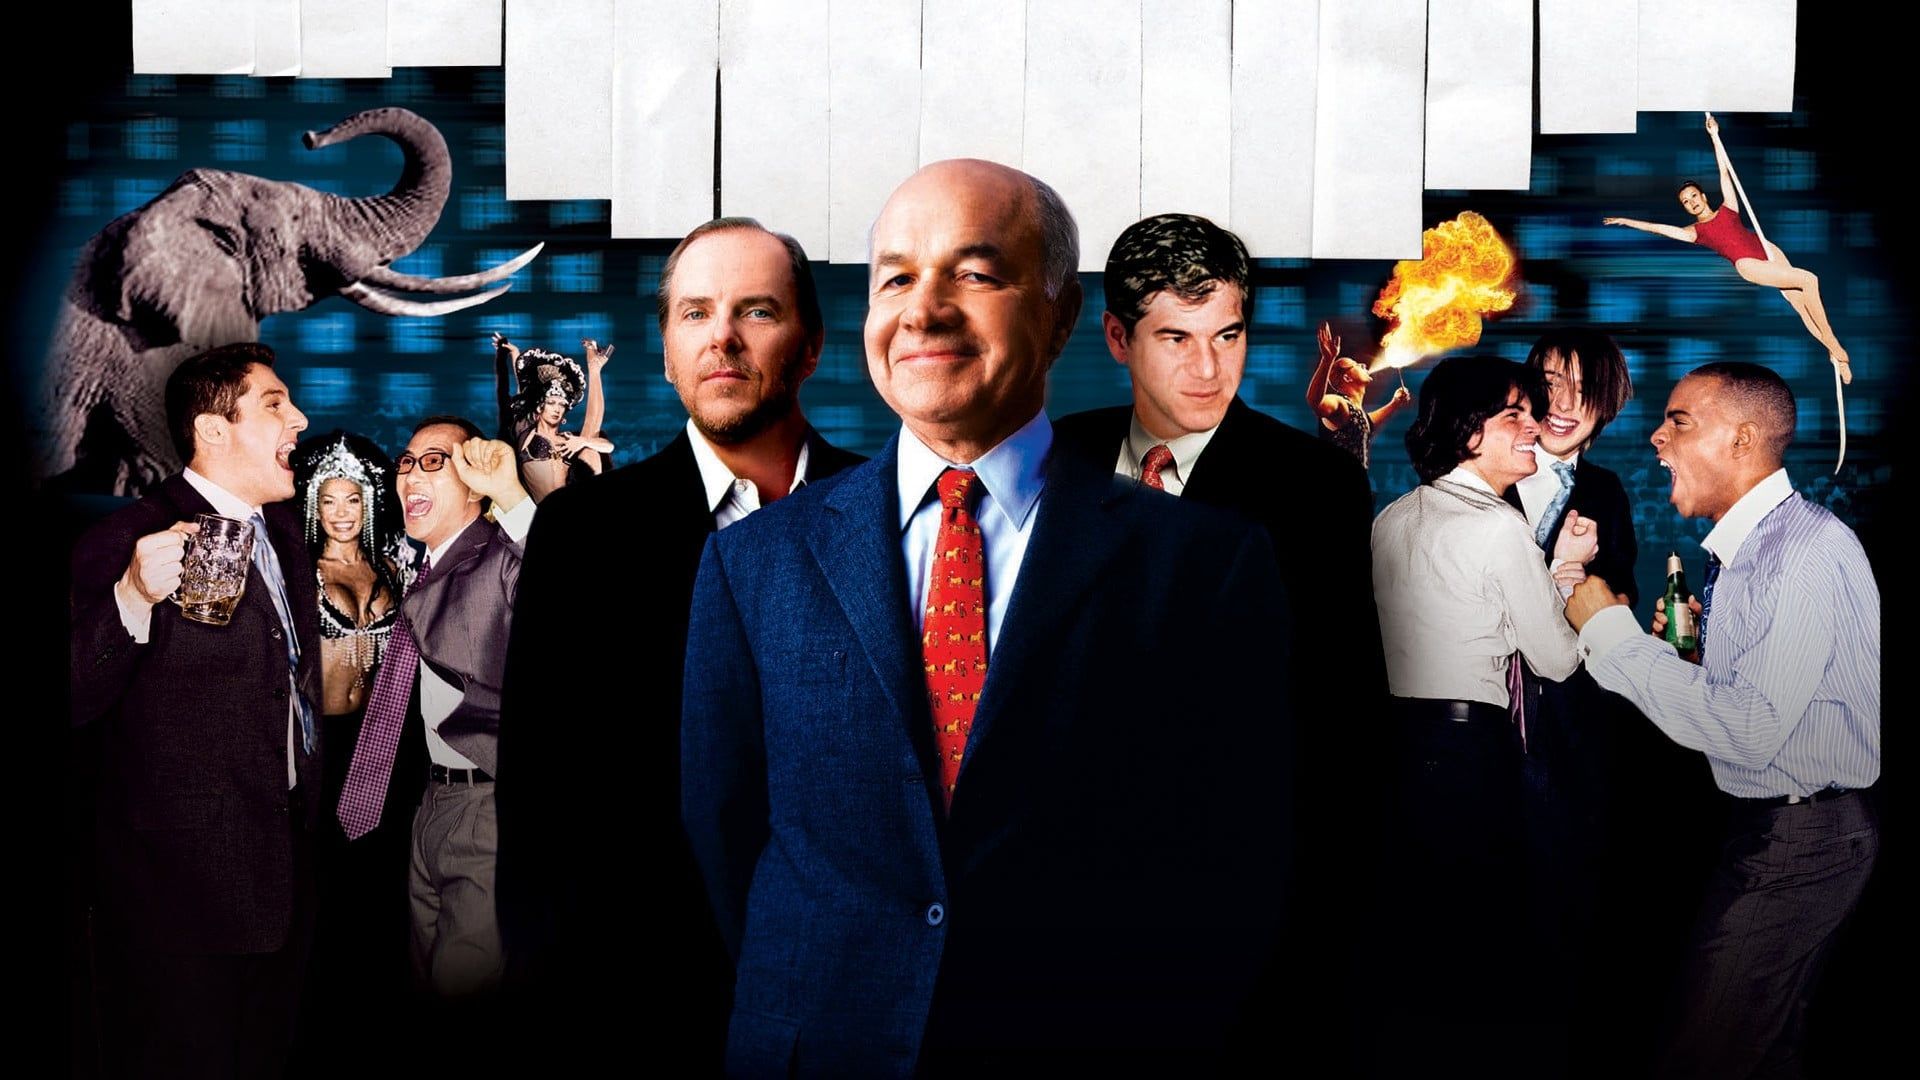 Enron: The Smartest Guys in the Room Backdrop